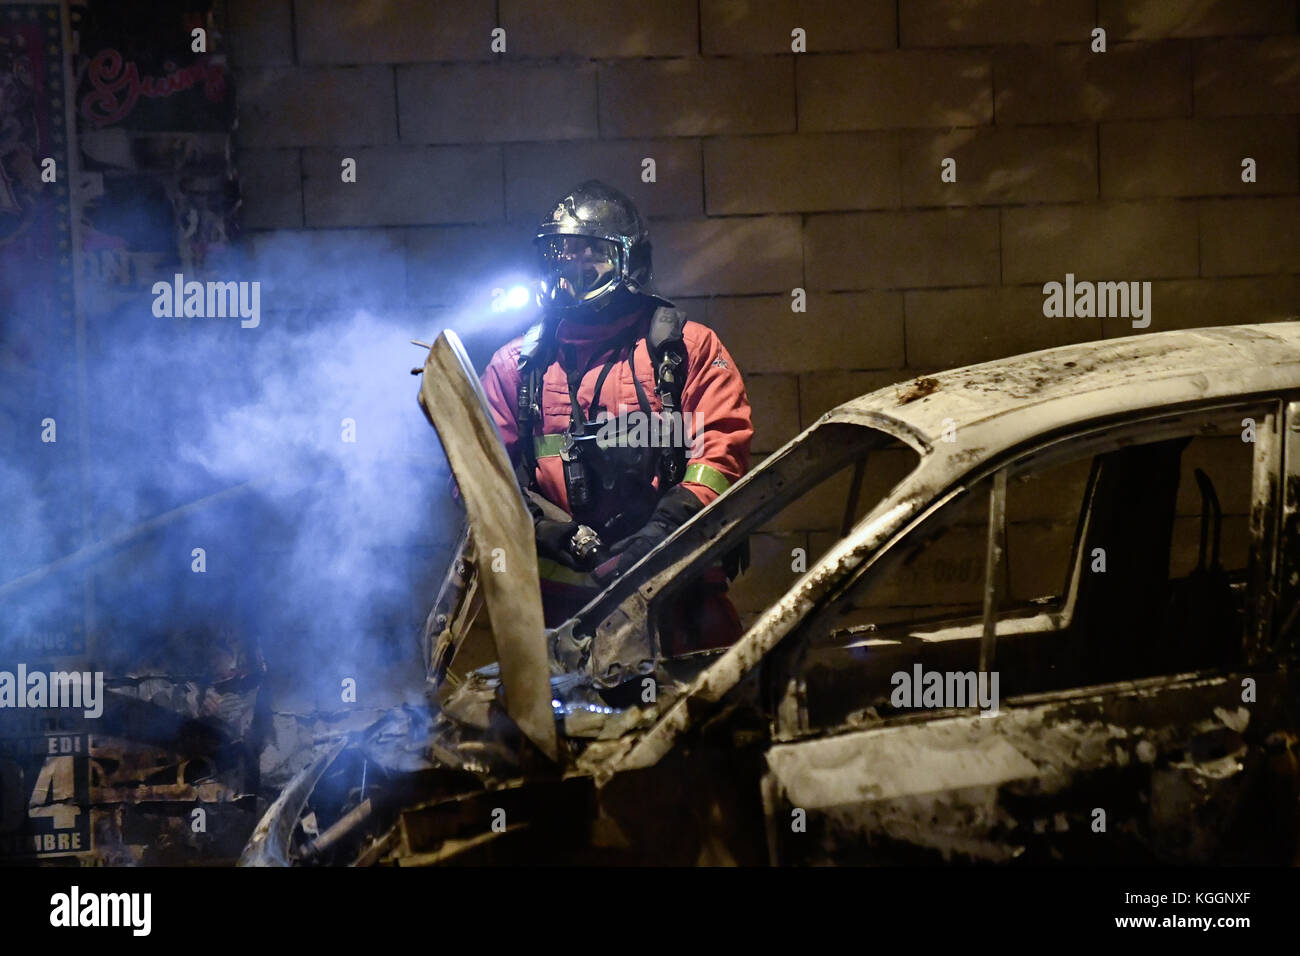 Julien Mattia / Le Pictorium -  Car on fire -  08/11/2017  -  France / ? haut de seine ? / Malakoff  -  Paris firefighters extinguish a burnt car in Malakoff. Of unknown origin the engine fire threatens an abandoned building, forcing the Paris fire to intervene in the building after extinguishing the fire. Stock Photo